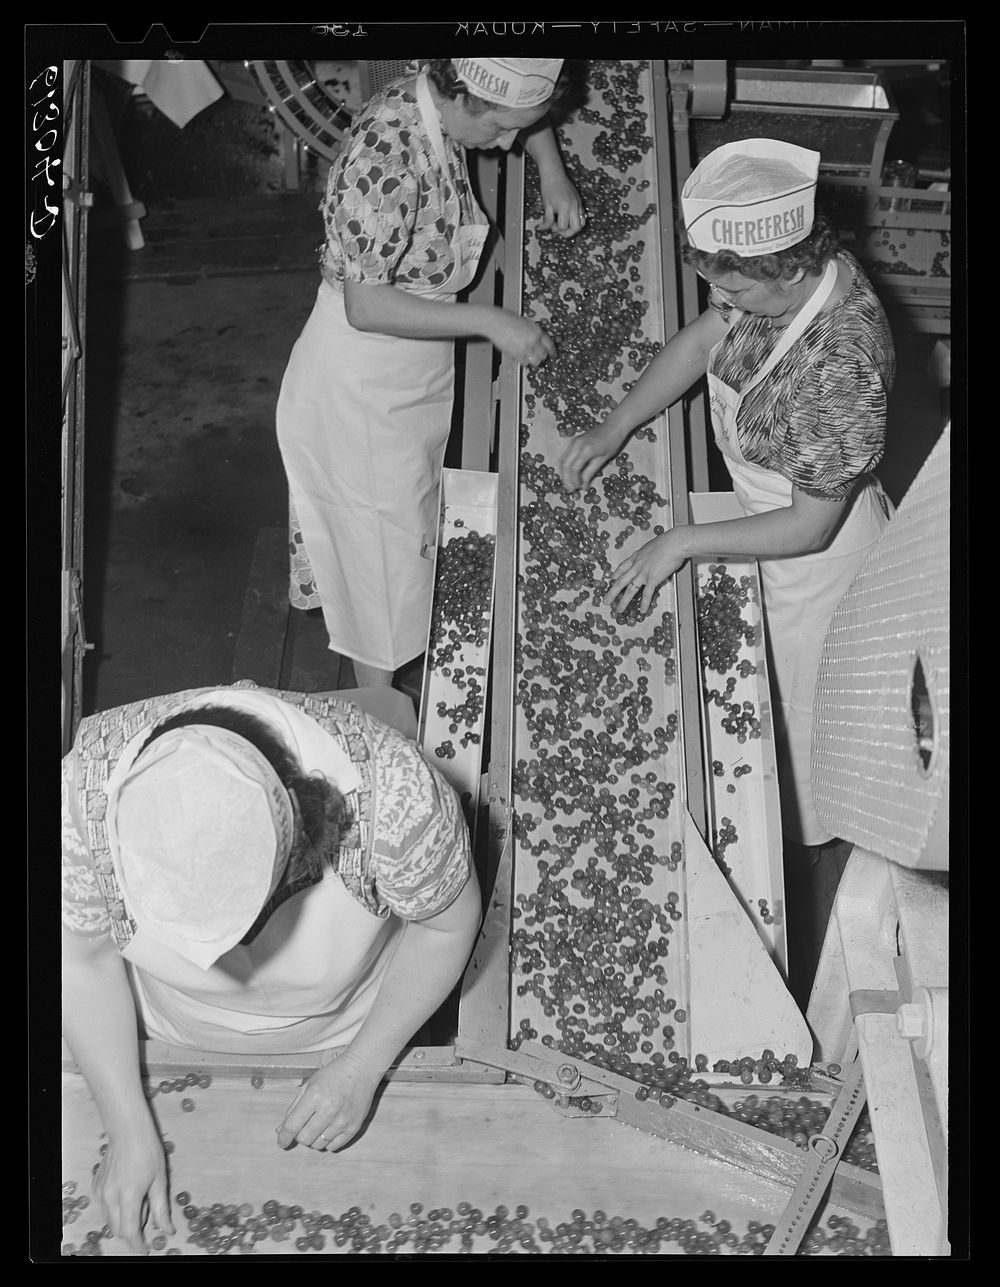 Removing defective cherries and stems. Canning plant, Door County, Wisconsin. Sourced from the Library of Congress.